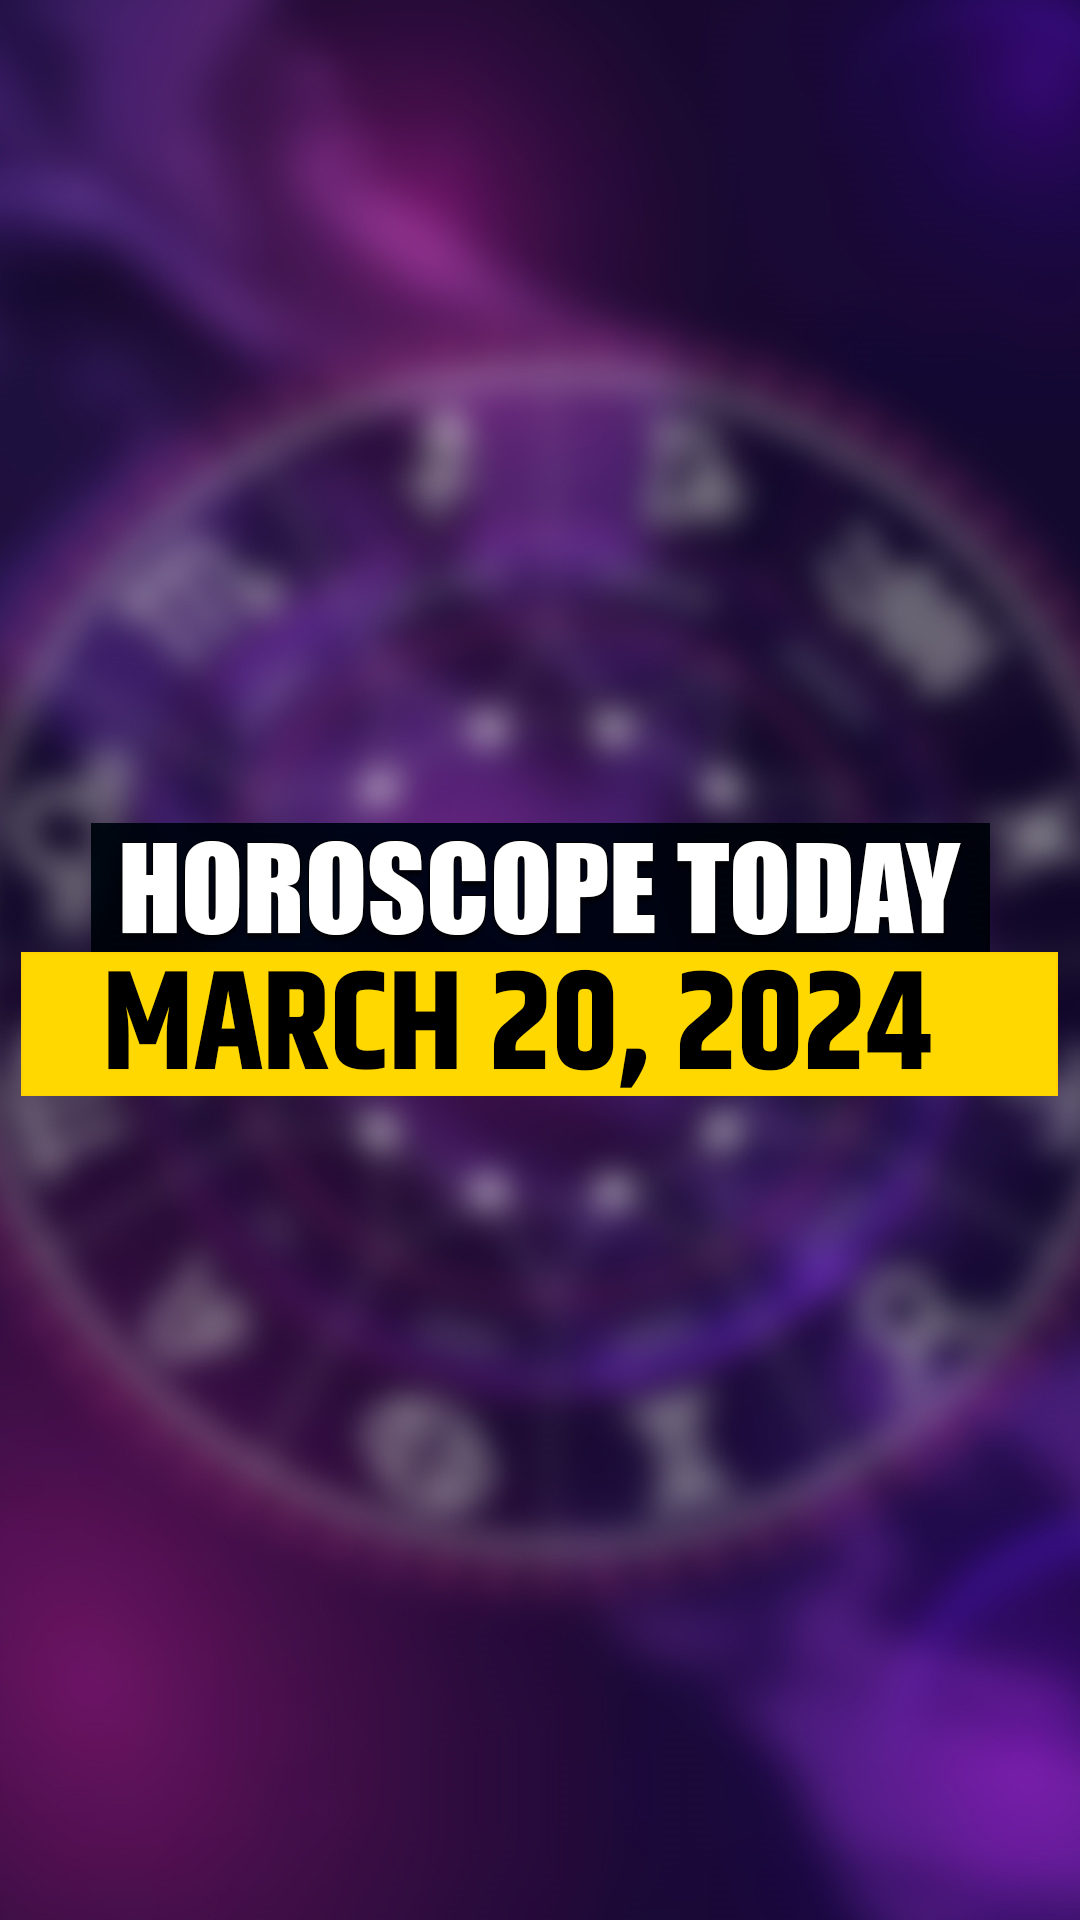 Leo to get good news, know about other zodiac signs in March 20, 2024 horoscope